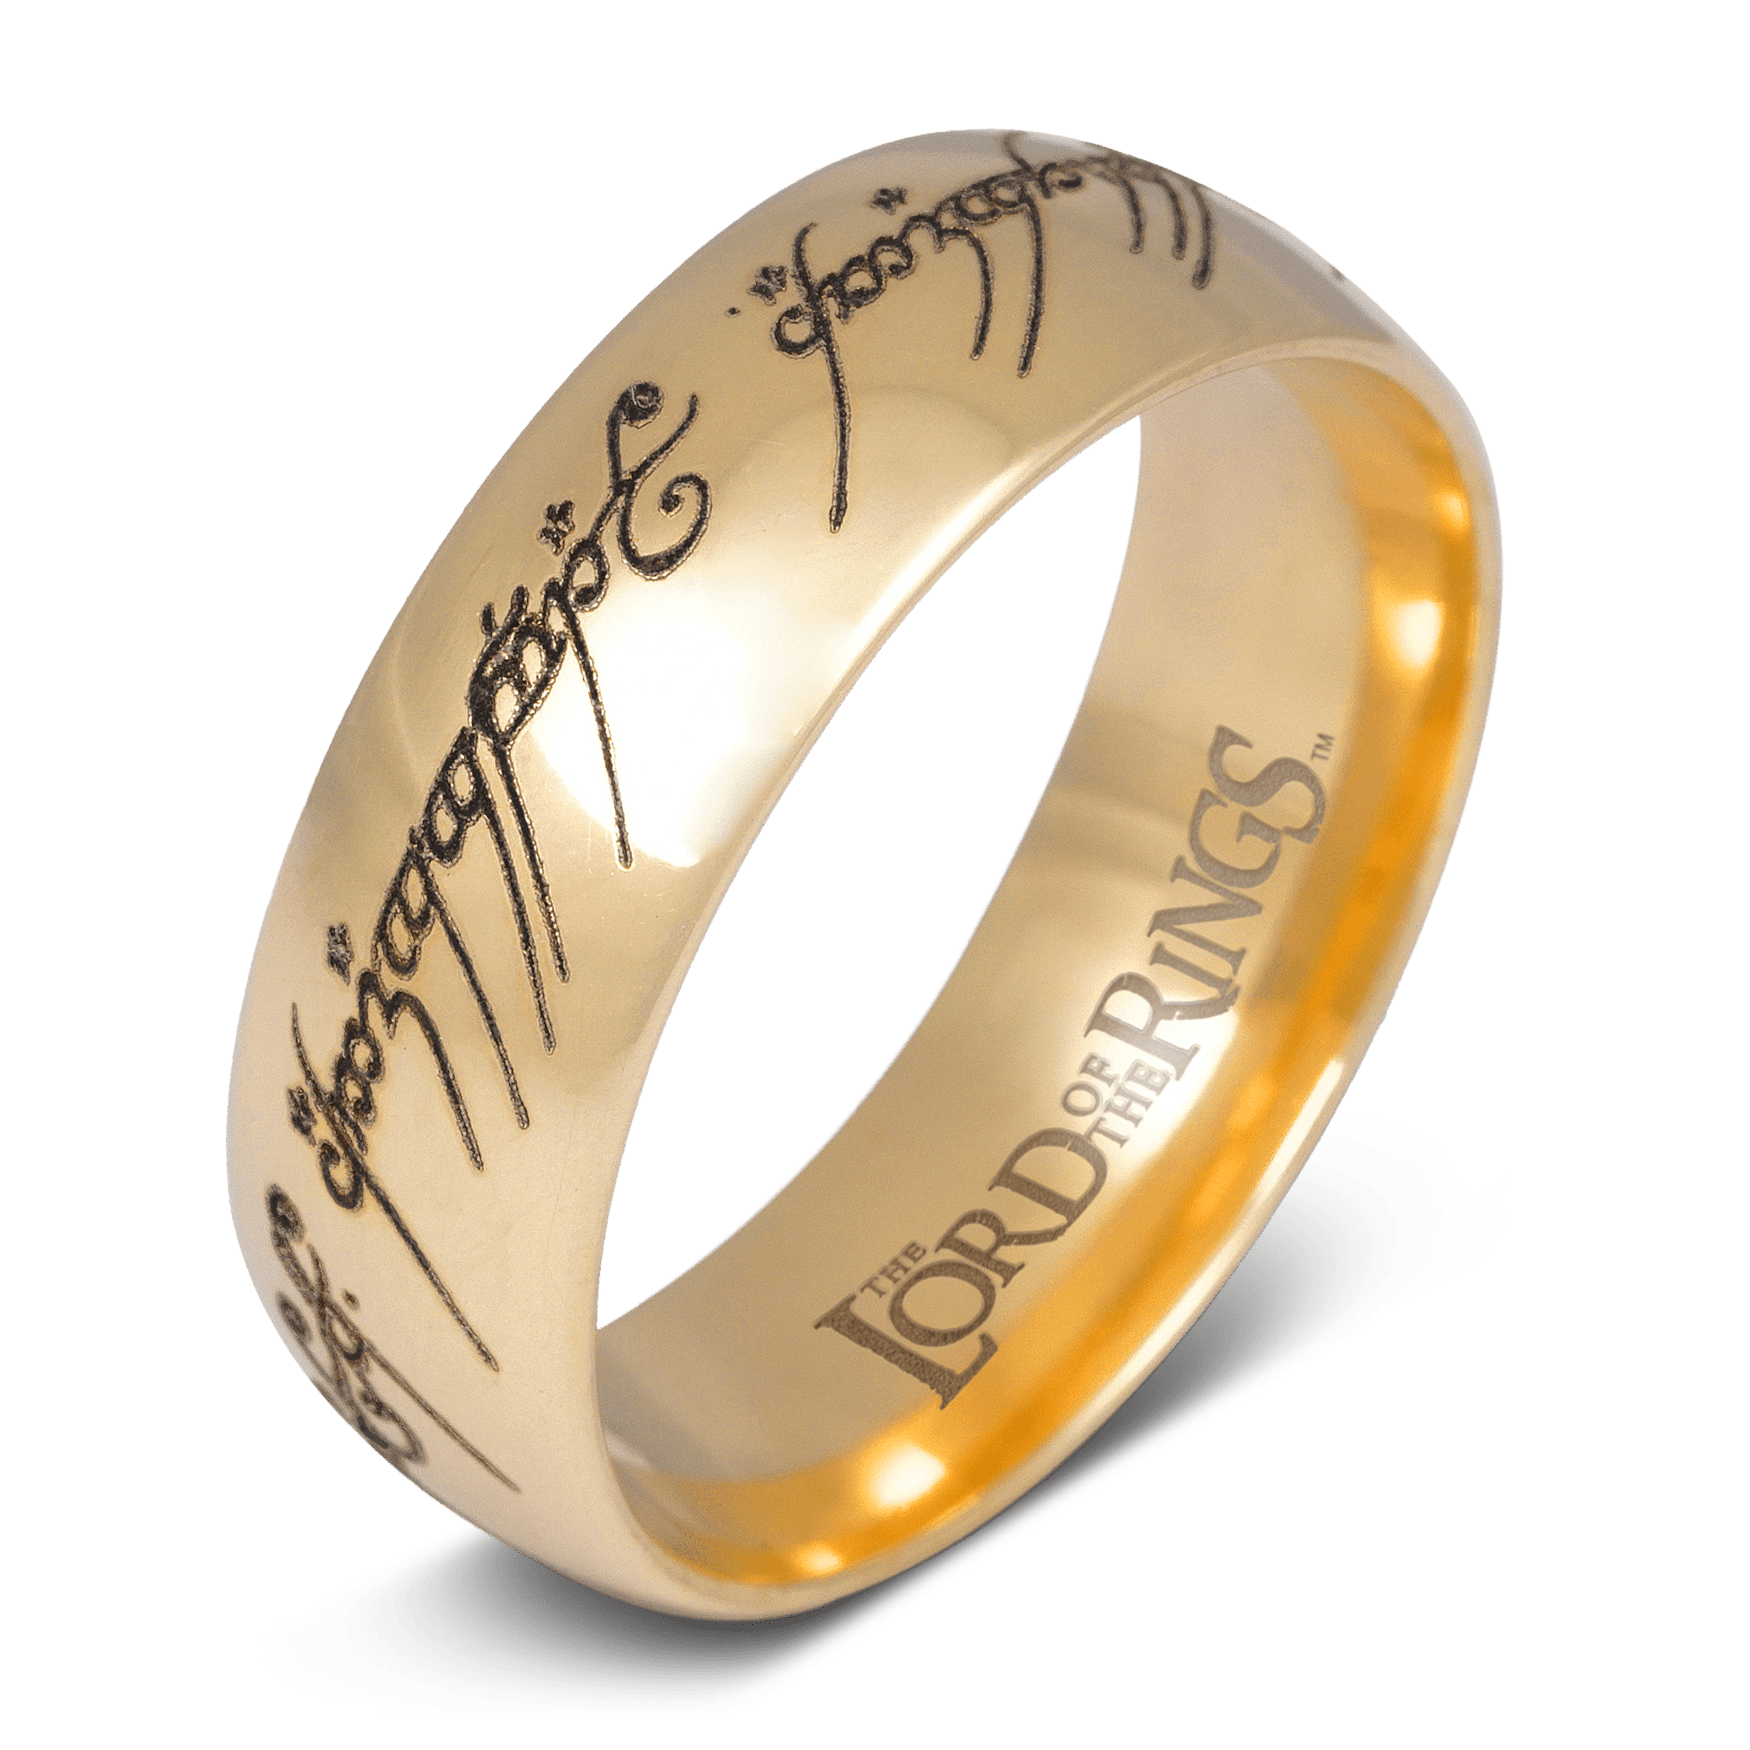 oogopslag emulsie niet voldoende The One Ring™️ To Rule Them All - Lord of the Rings